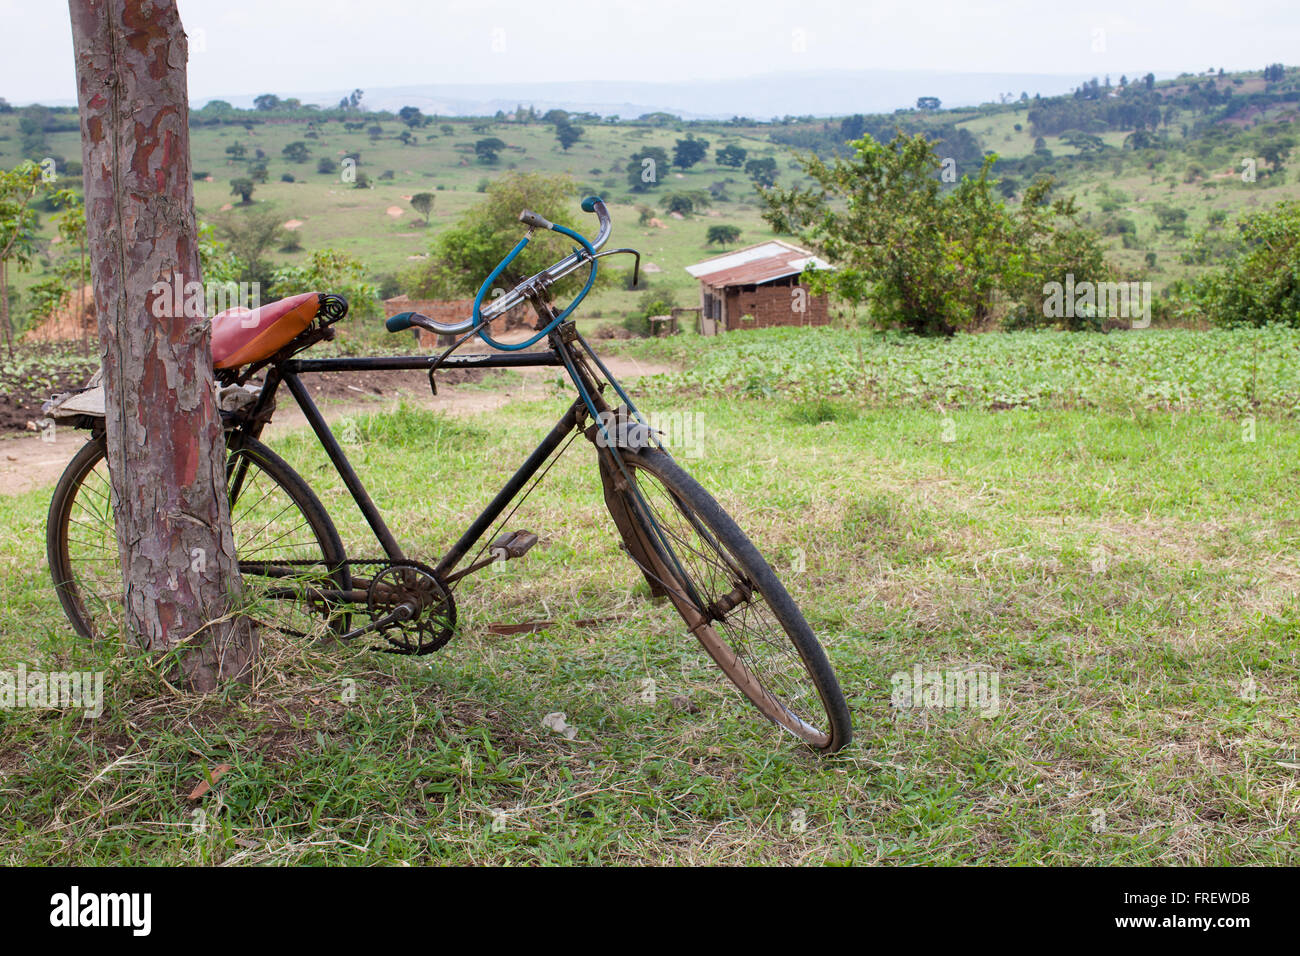 A bicycle parked up against a tree, Uganda Africa Stock Photo